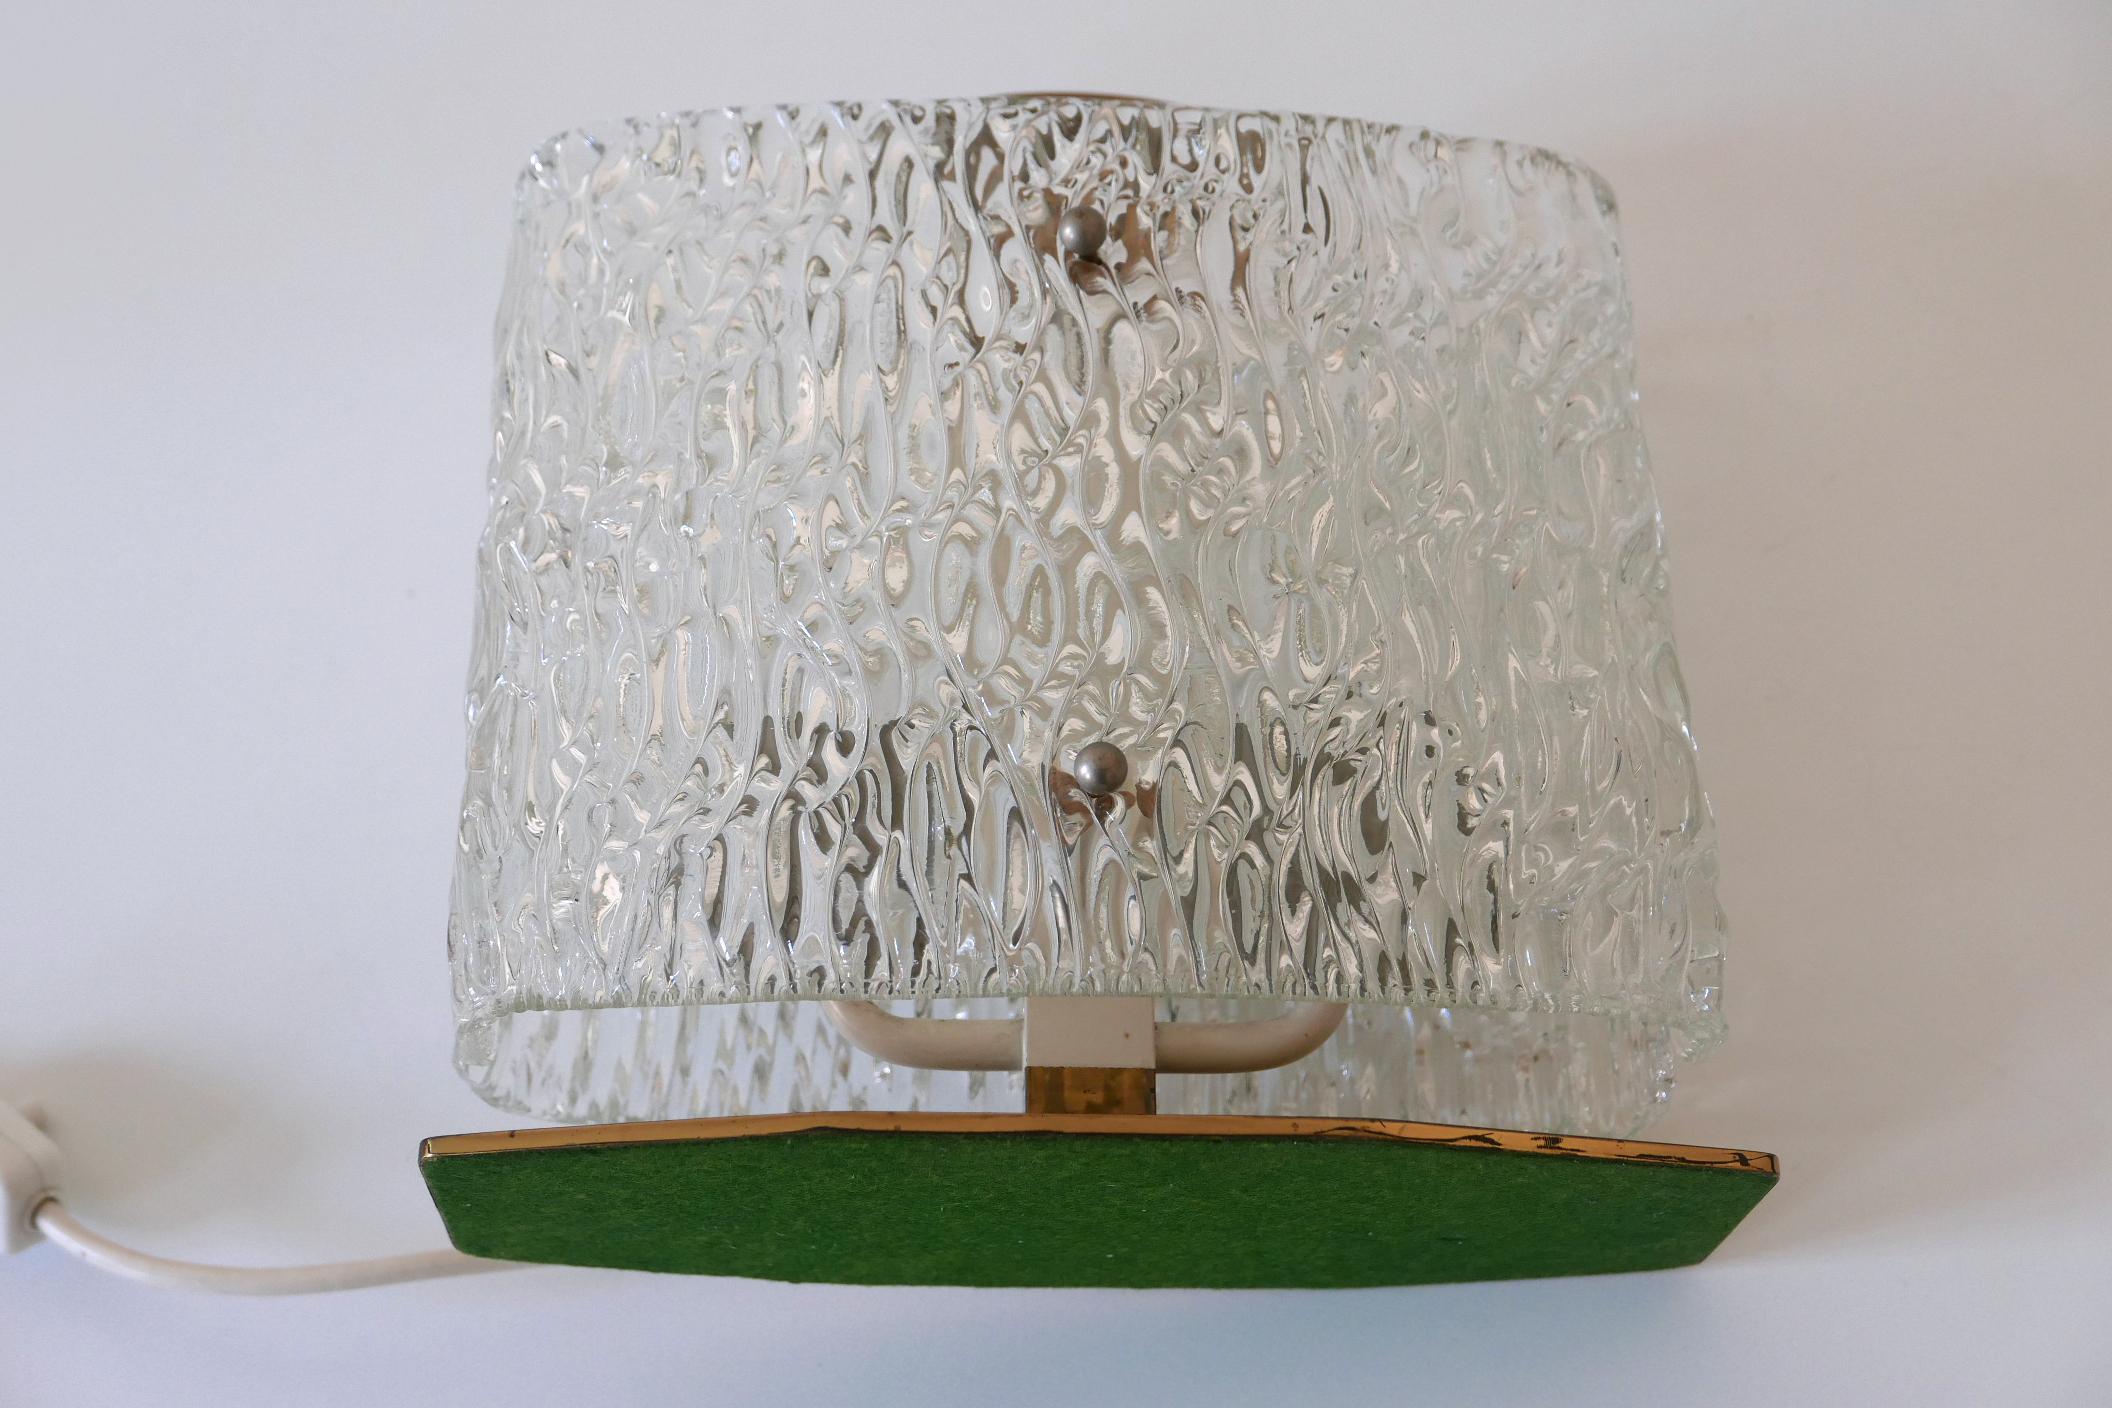 Exceptional Mid-Century Modern Table Lamp with Ice Glass Shade, 1950s, Italy For Sale 14